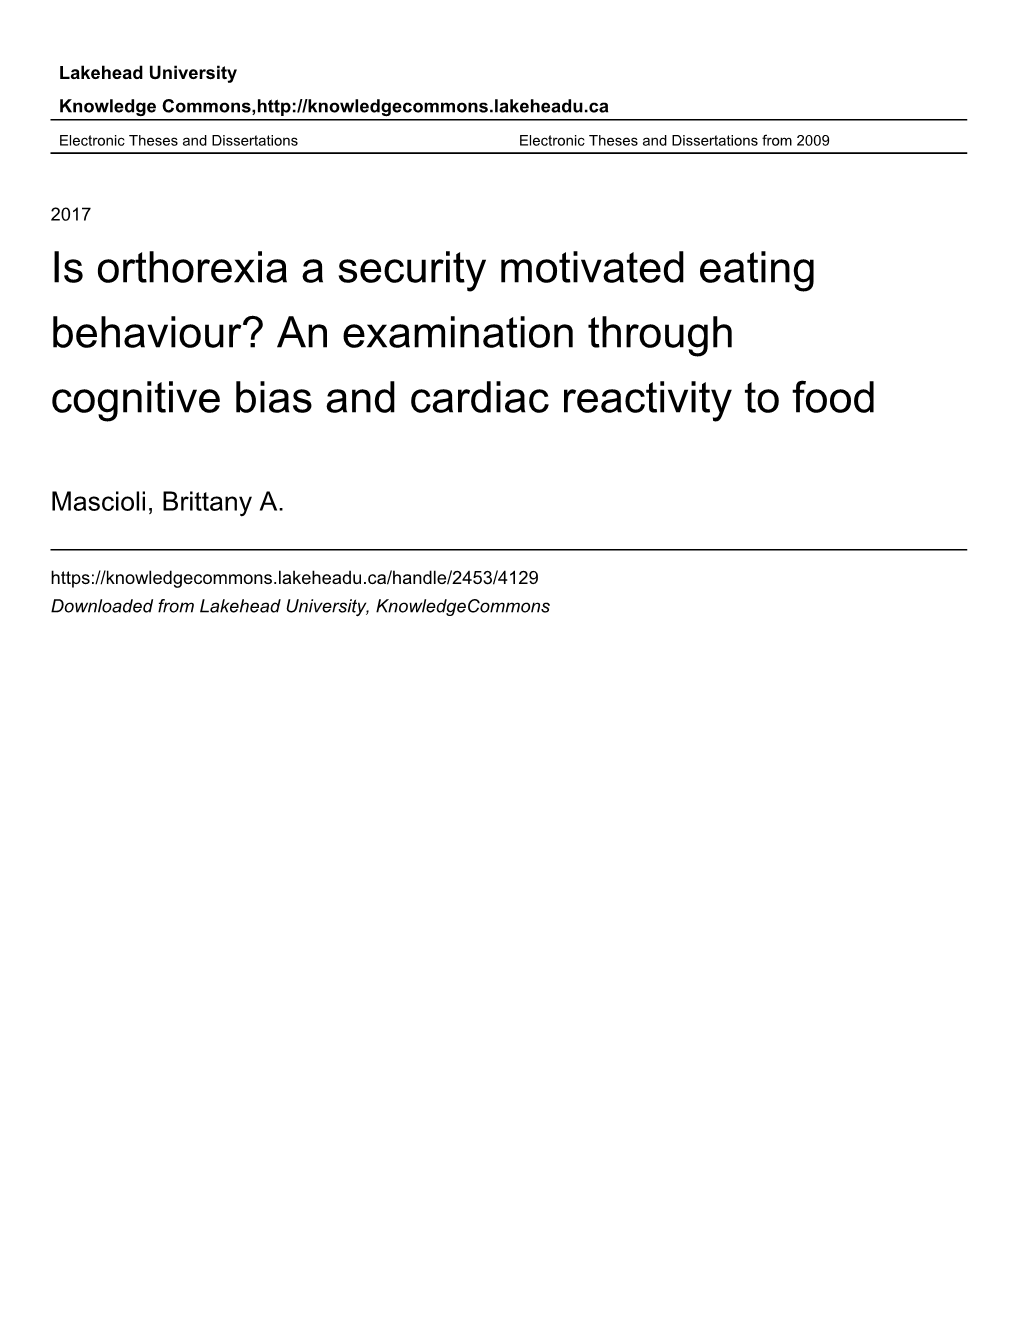 Is Orthorexia a Security Motivated Eating Behaviour? an Examination Through Cognitive Bias and Cardiac Reactivity to Food